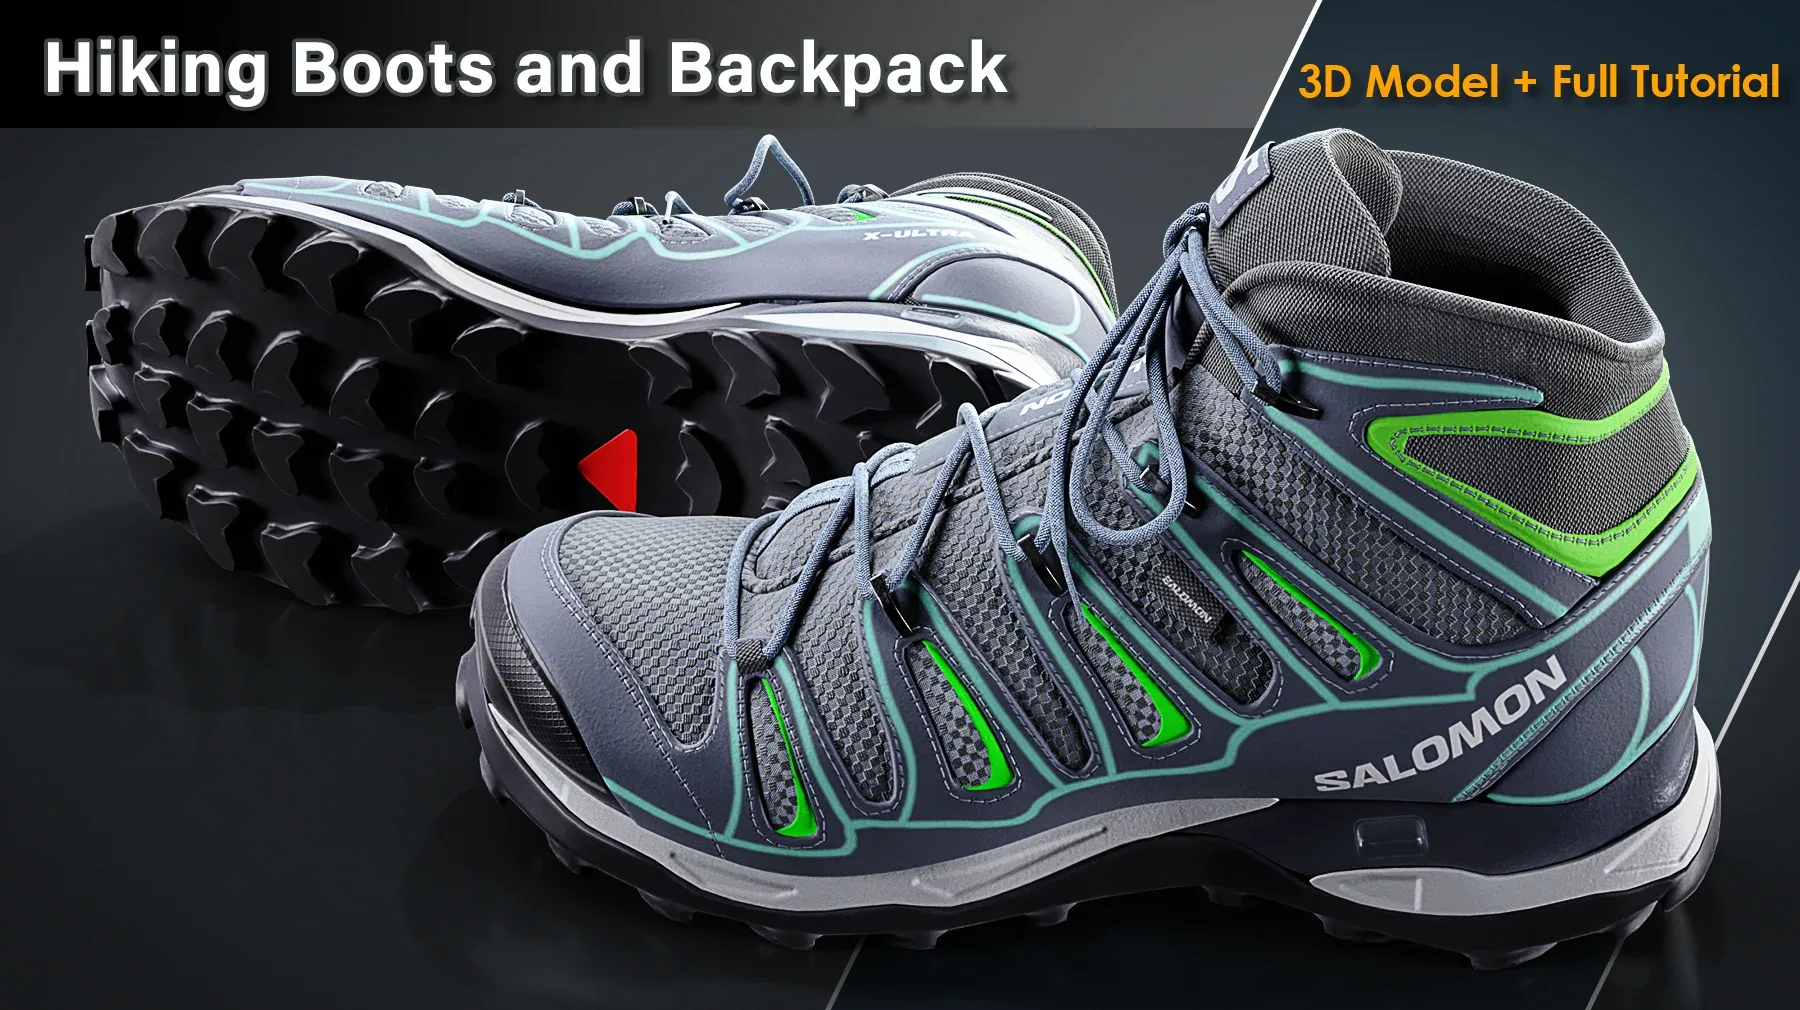 Hiking Boots and Backpack/ Full Tutorial + 3D Model